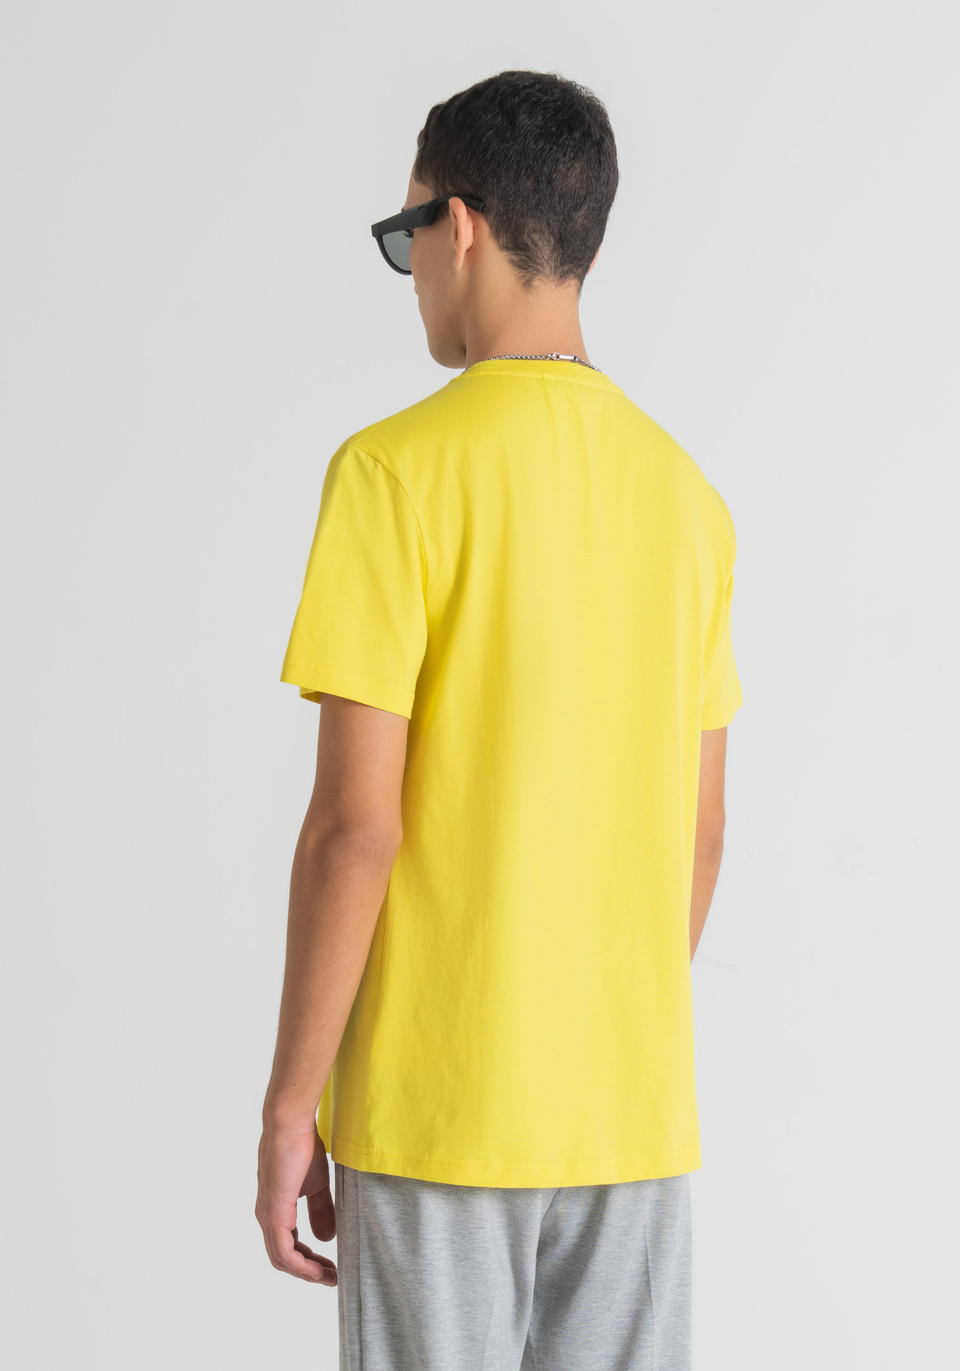 SLIM-FIT T-SHIRT IN PURE COTTON WITH PRINTED LOGO - Antony Morato Online Shop